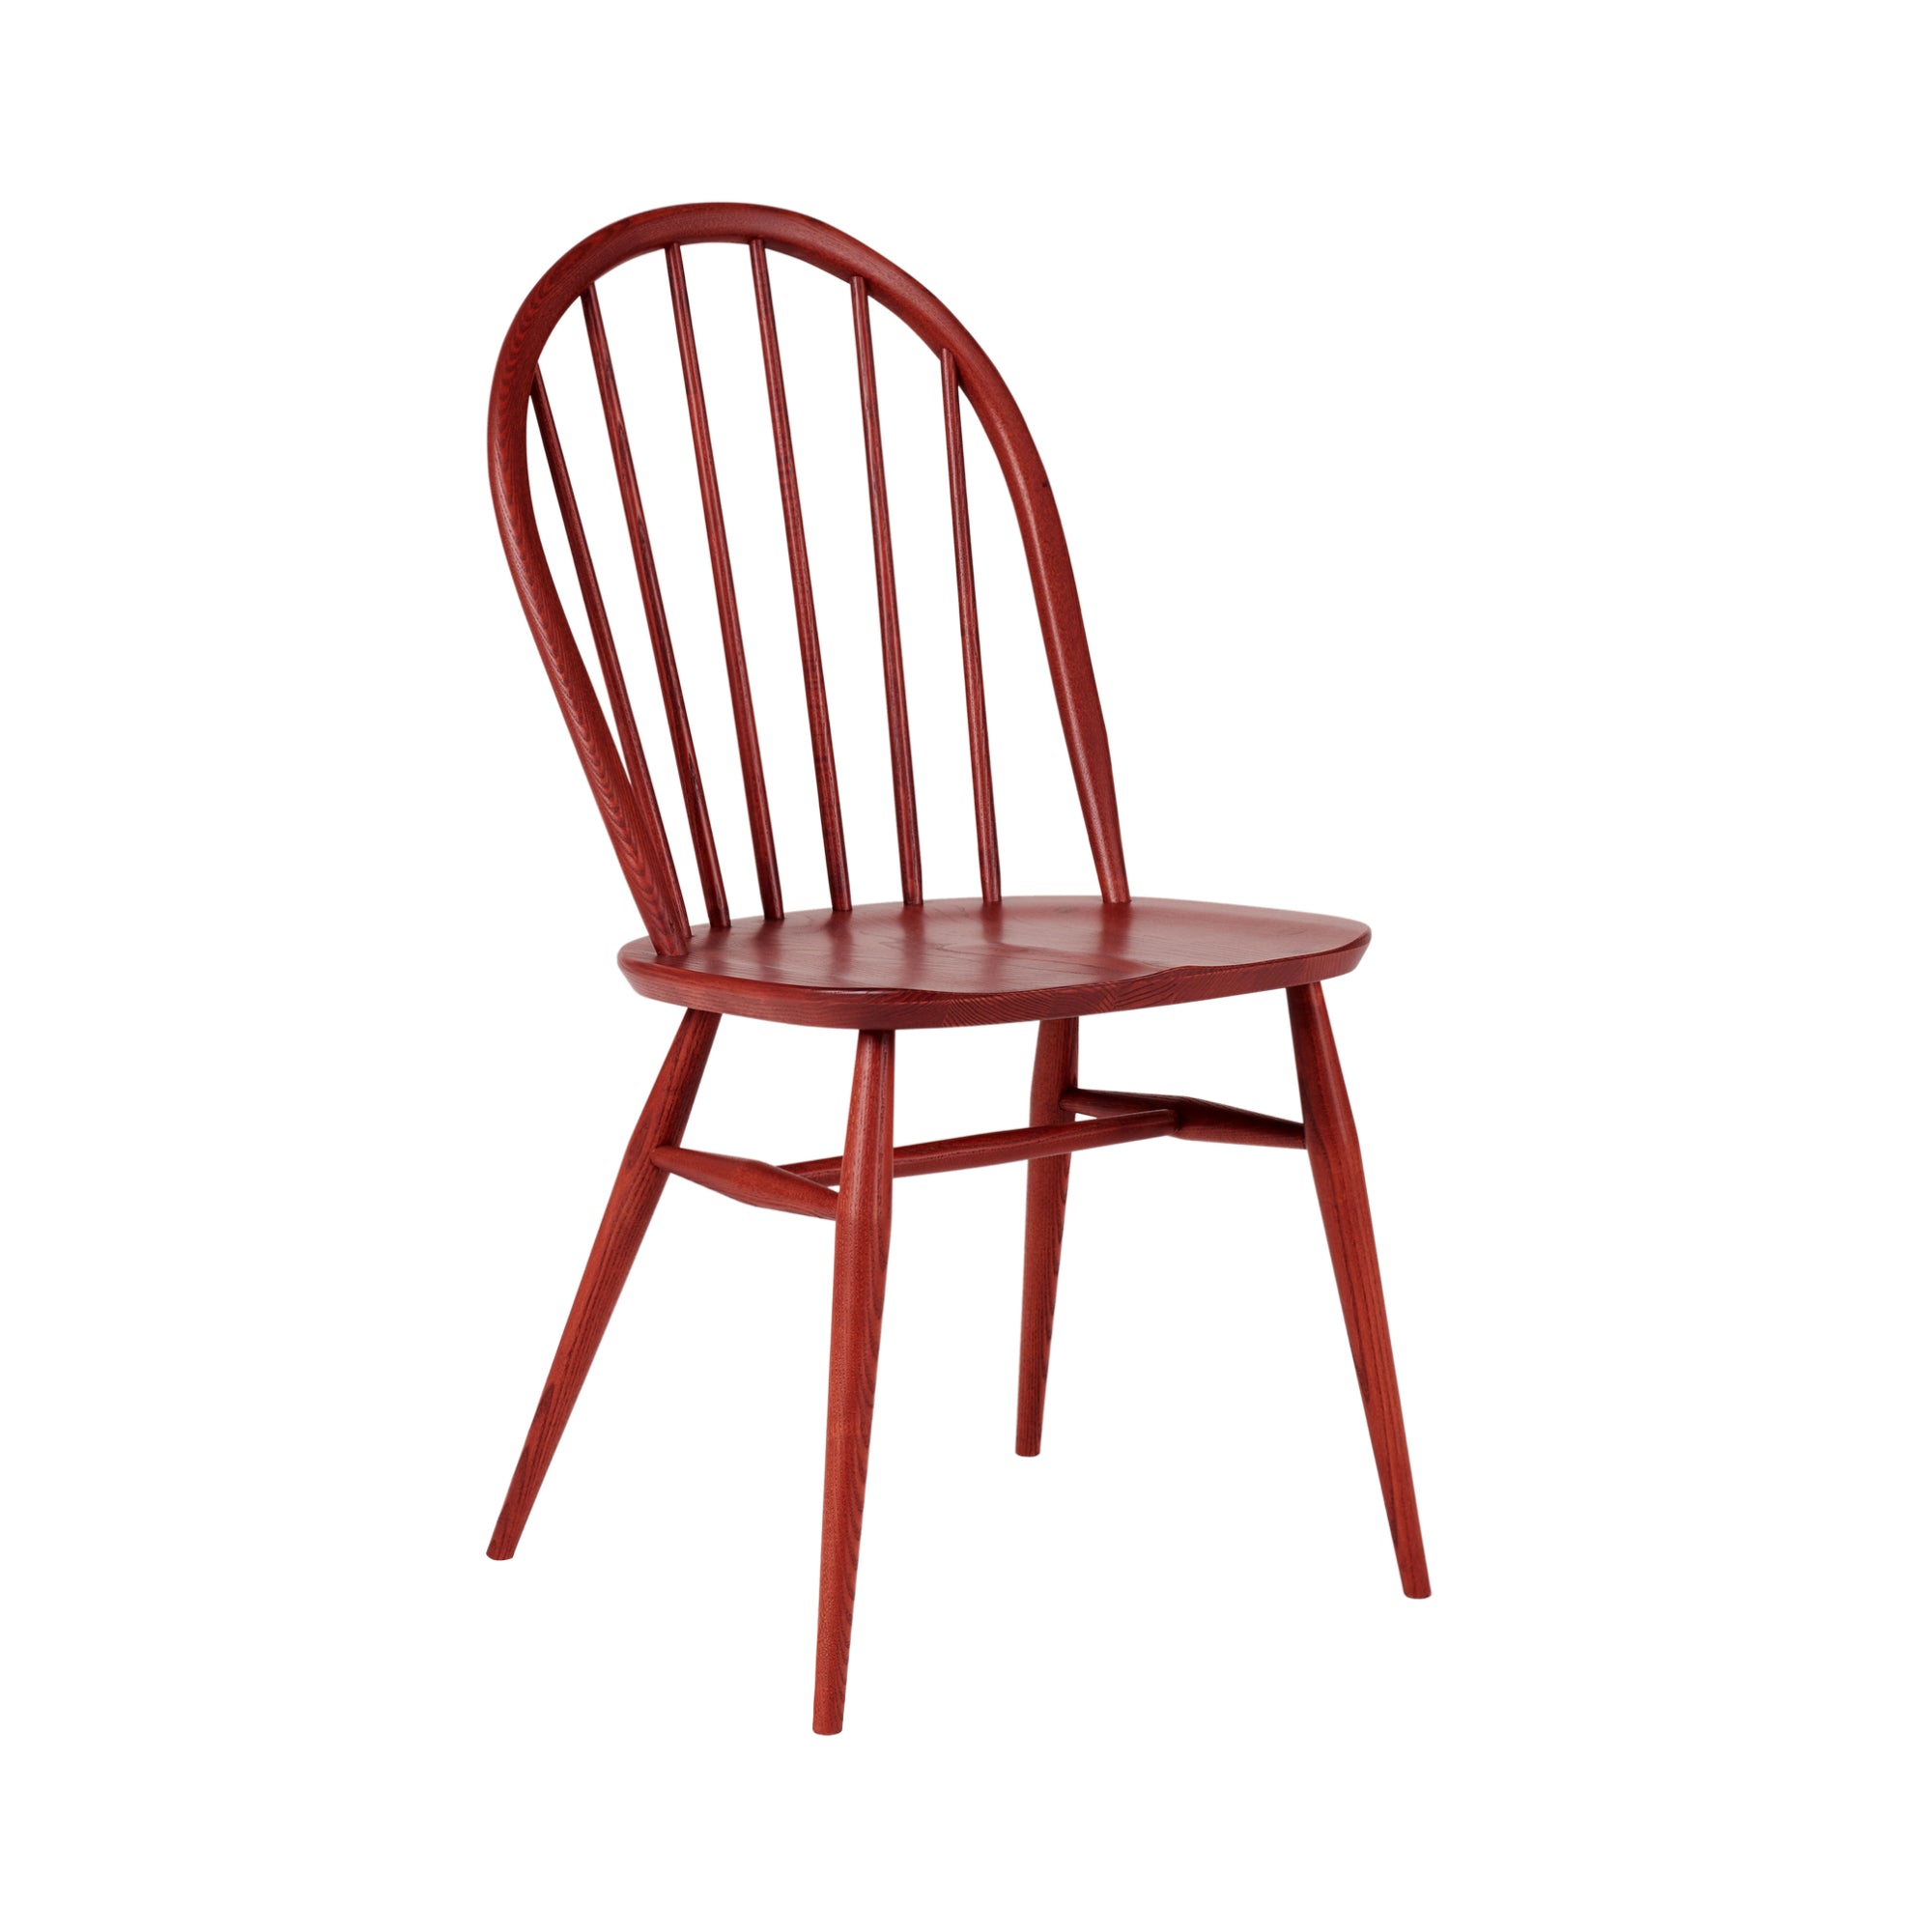 Originals Utility Dining Chair: Stained Vintage Red